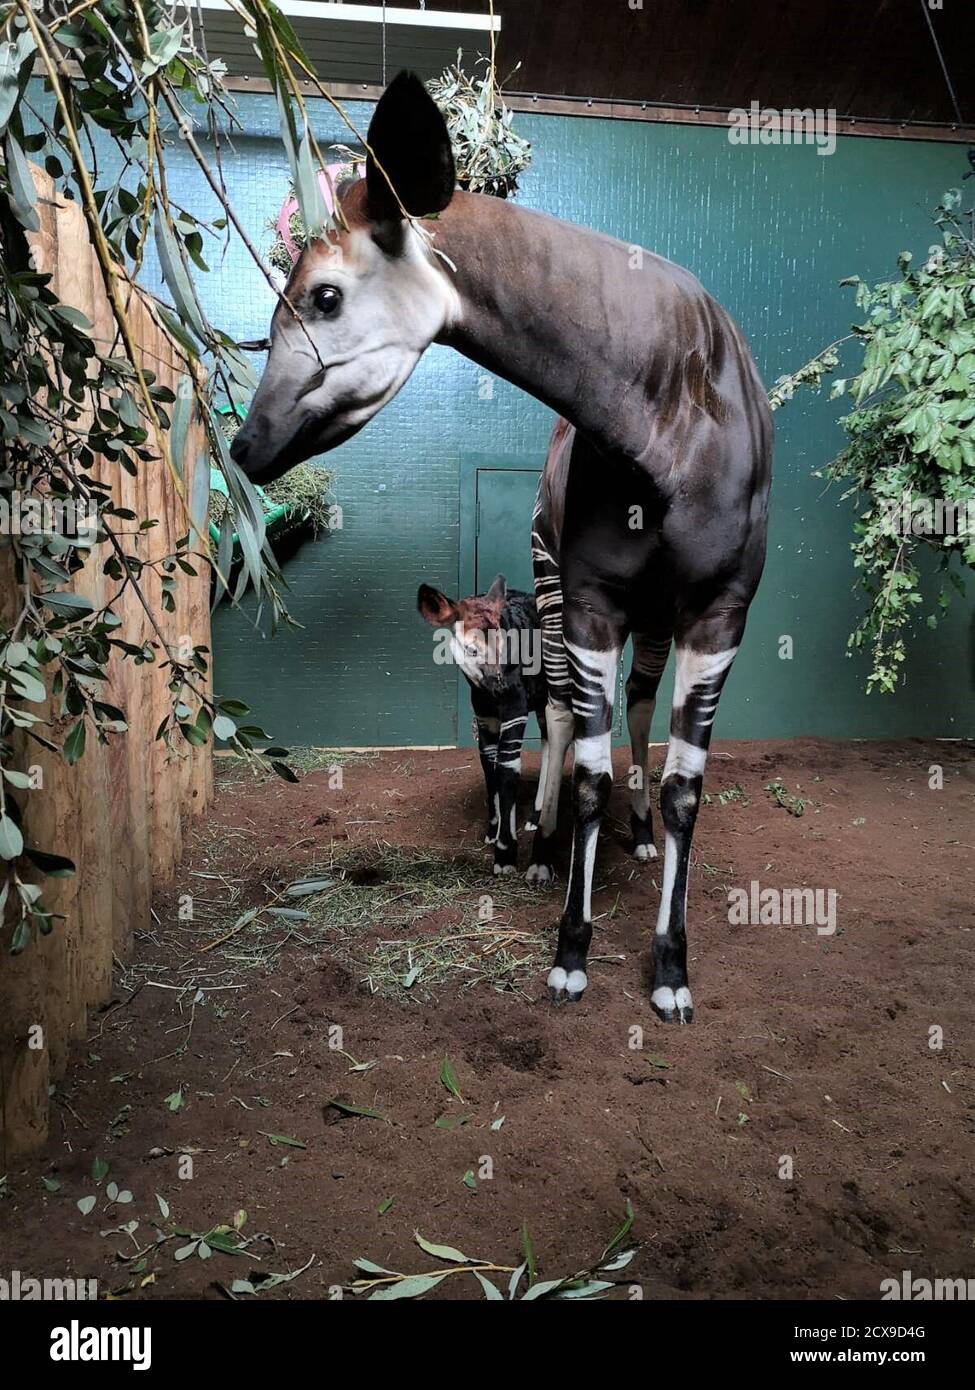 Stars and stripes   Star of ITV’s London Zoo: An Extraordinary Year gives birth ahead of Episode 2       Oni the okapi, who featured in the first episode of last week’s ITV documentary, London Zoo: An Extraordinary Year - has delighted zookeepers at the iconic zoo by giving birth to a healthy baby girl.      The second-time mum, whose lockdown pregnancy took centre stage in Thursday’s episode, went into labour late on Sunday 20 September before giving birth to the adorable calf – given the name ‘Ede’ by zookeepers – the following morning. Stock Photo